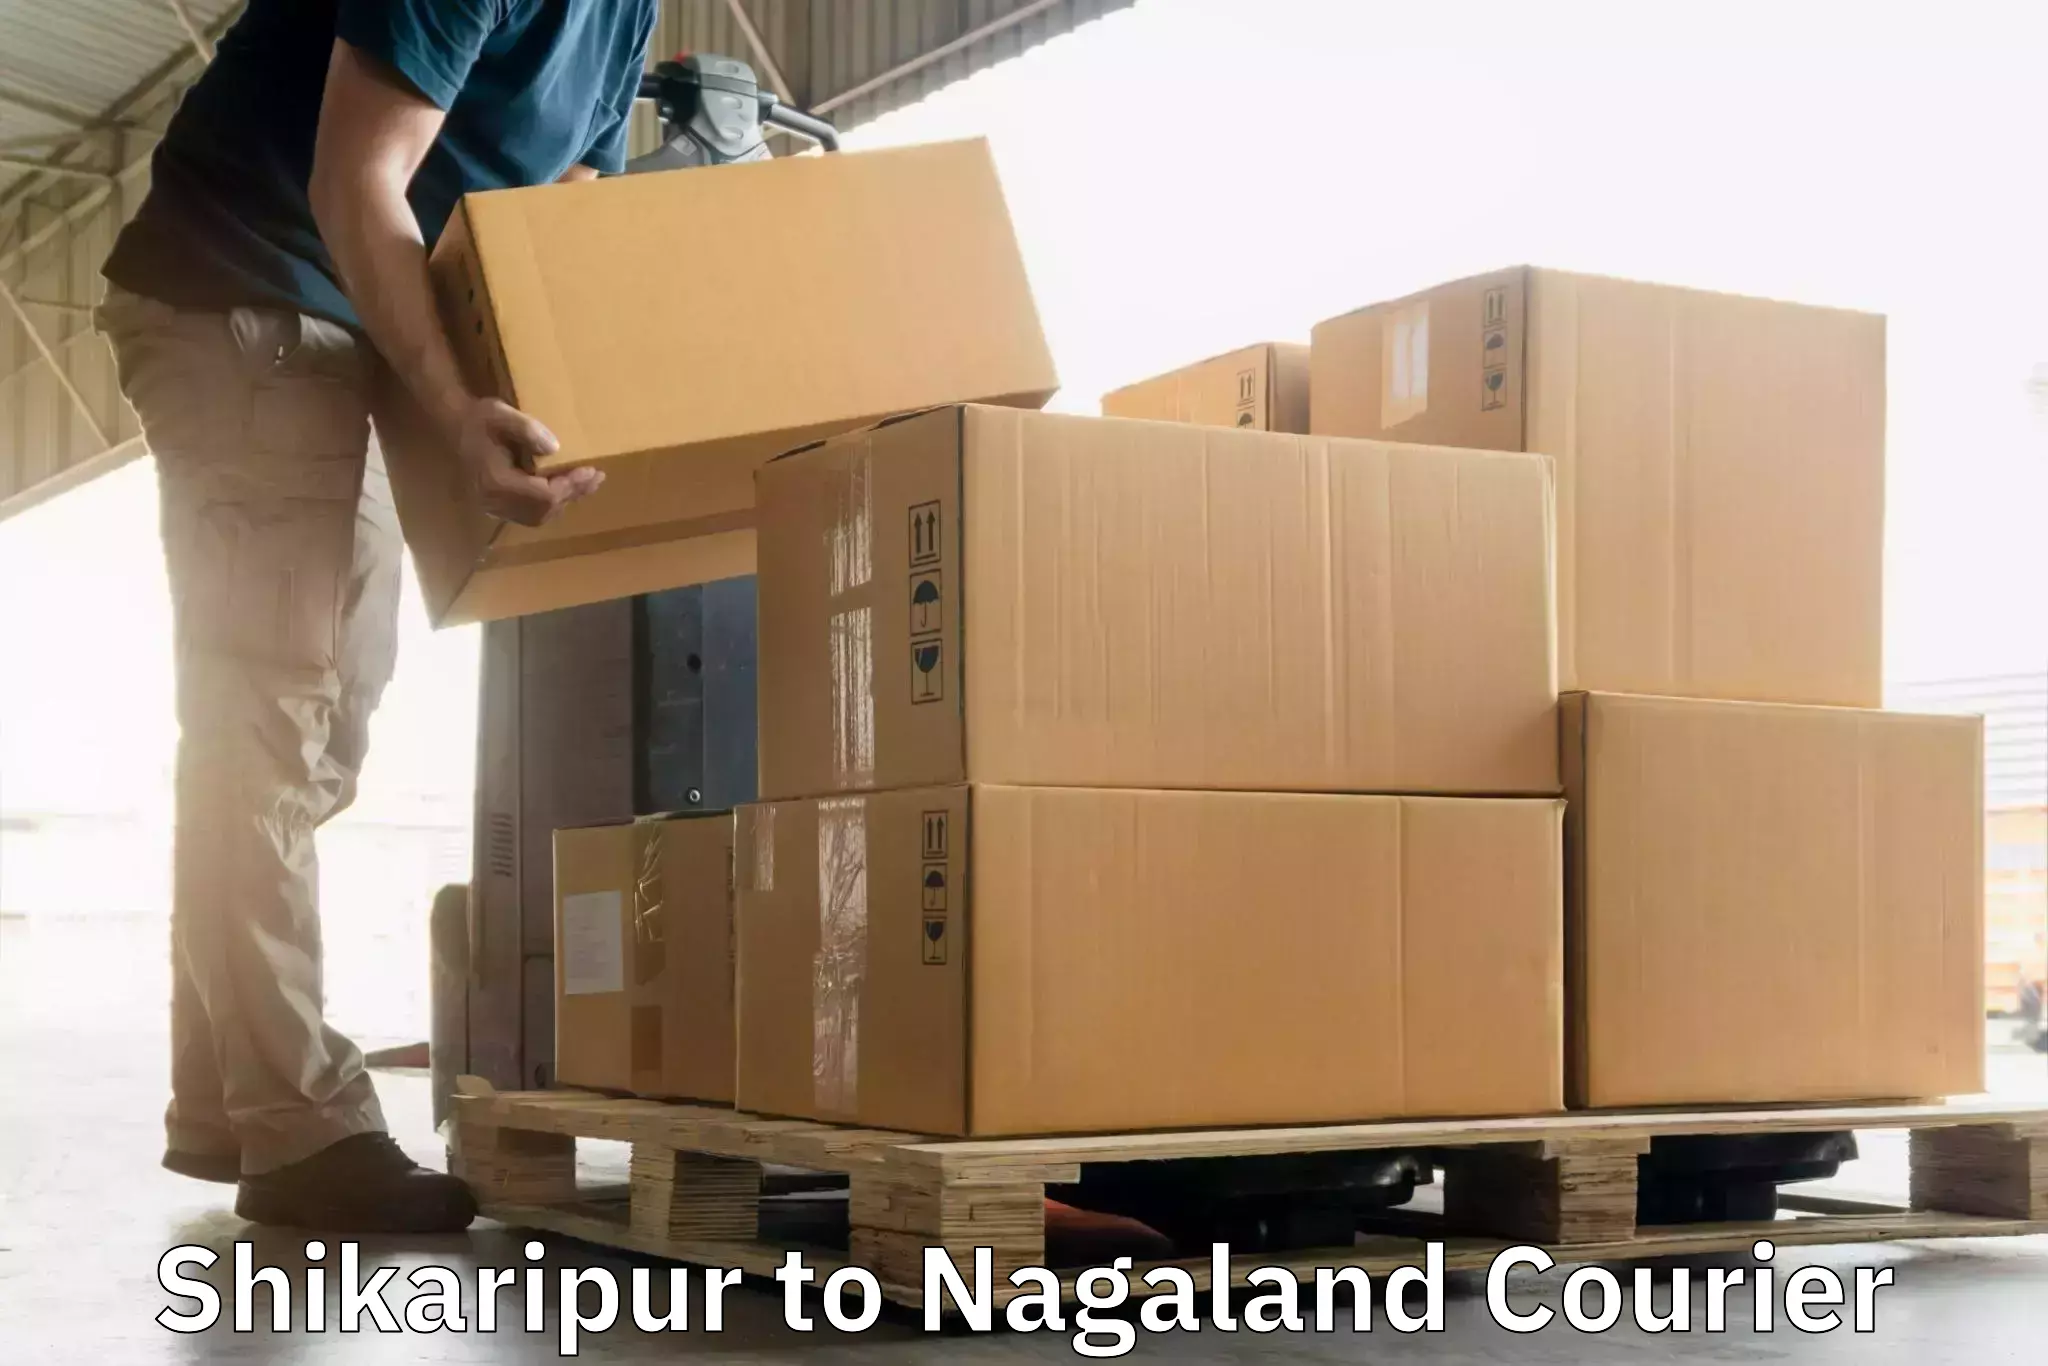 Cash on delivery service Shikaripur to Nagaland